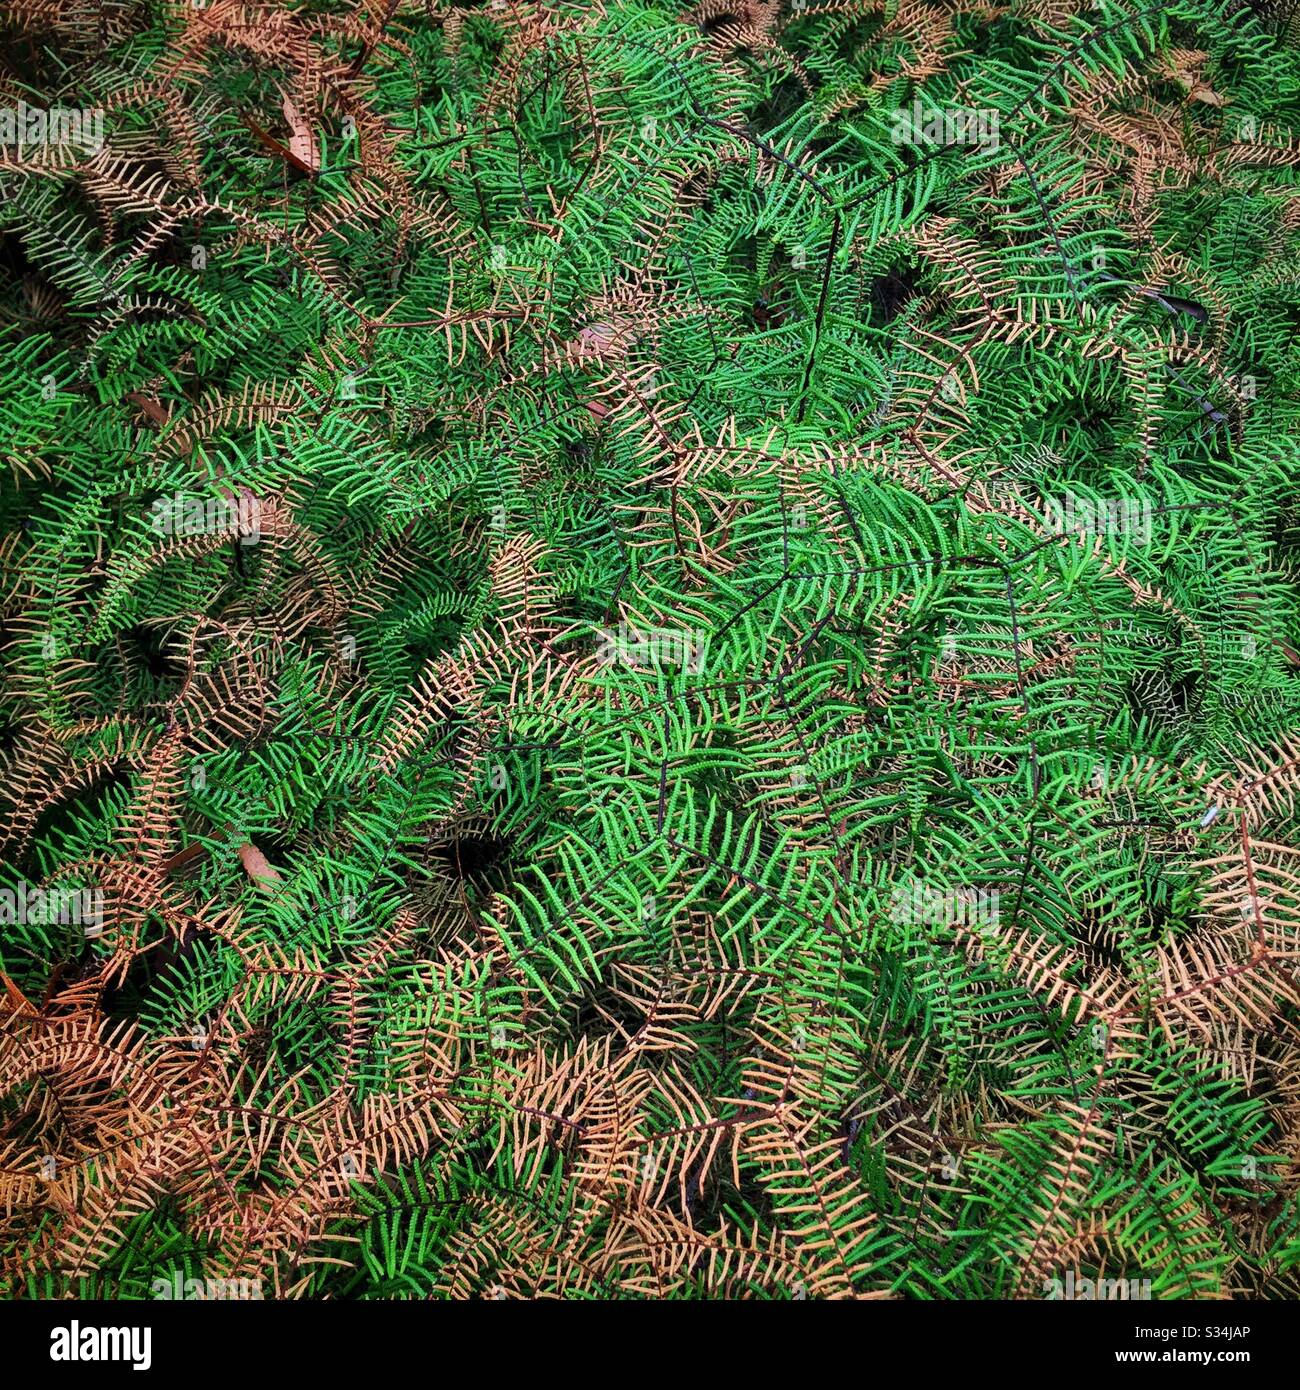 Scrambling Coral Fern affected by drought, Leura, Blue Mountains, NSW, Australia Stock Photo